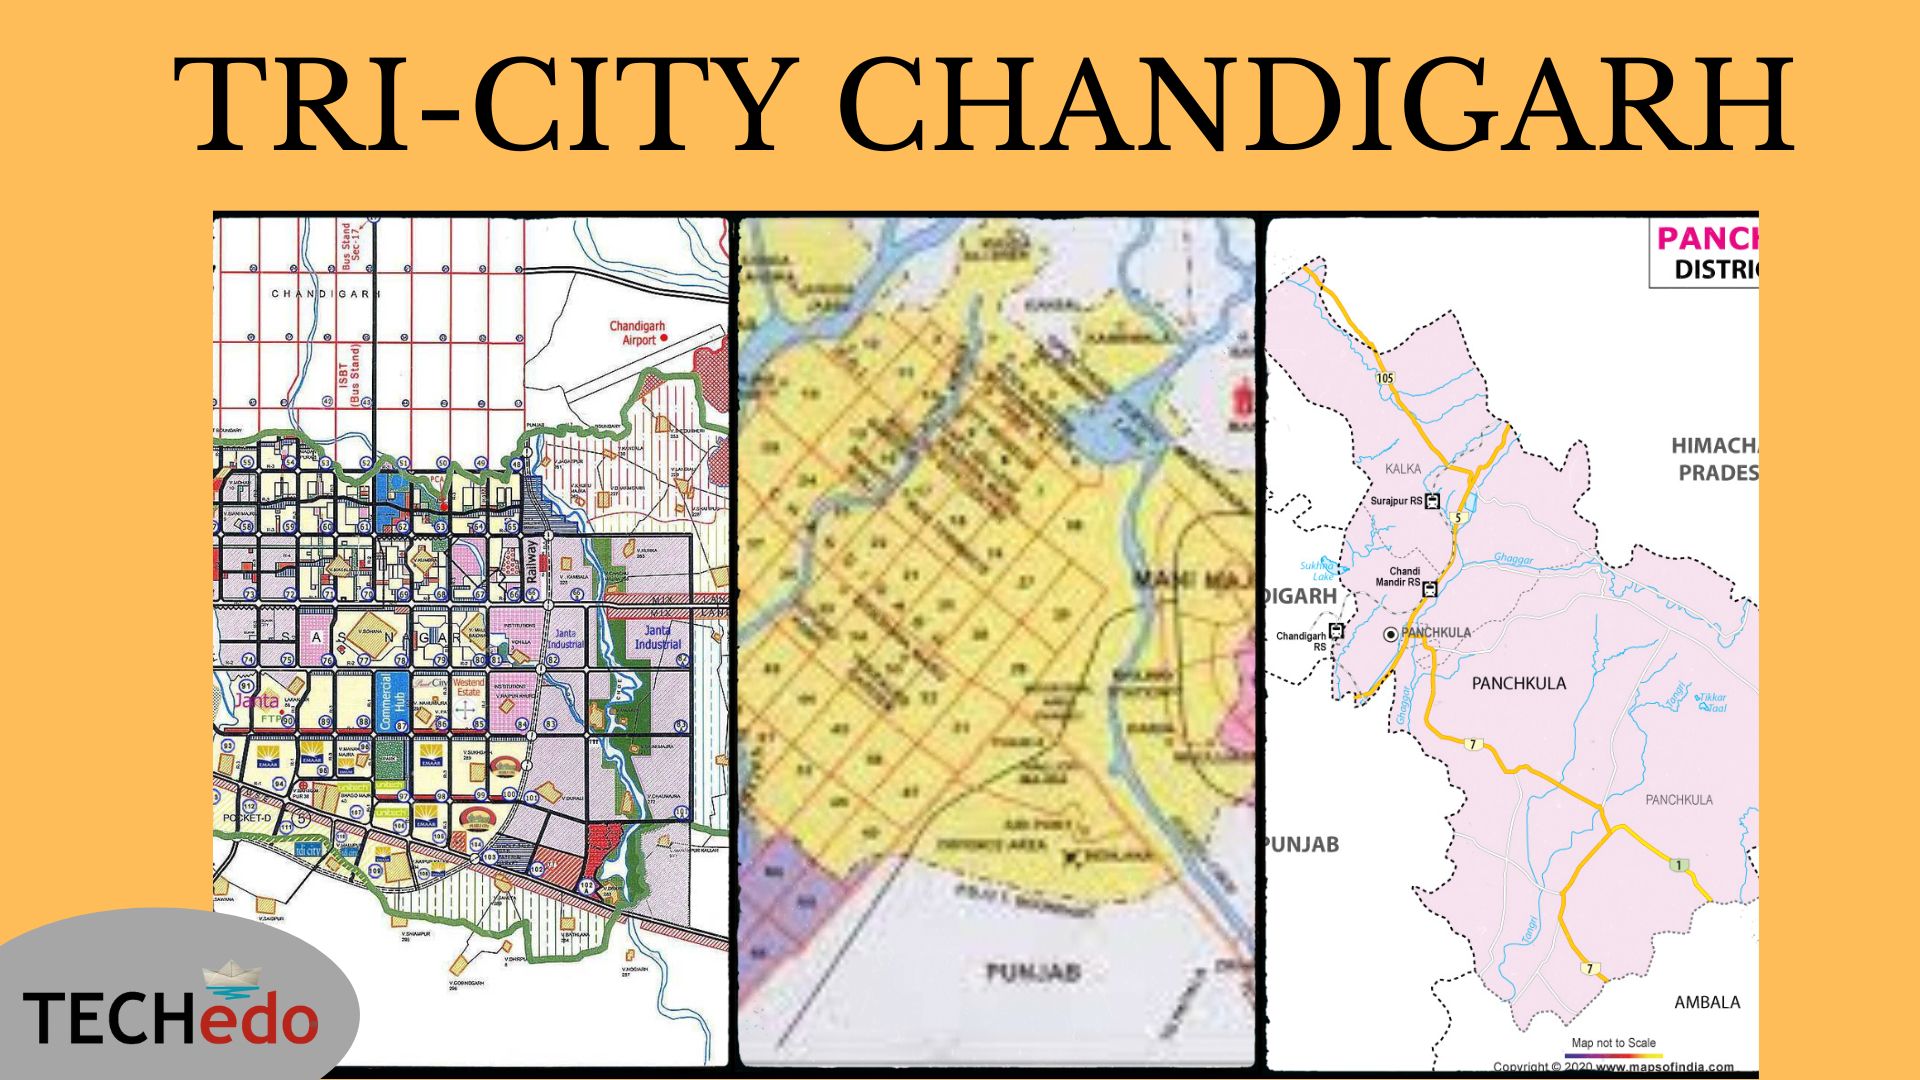 Masterpiece of Urban Planning - Things to do in Chandigarh